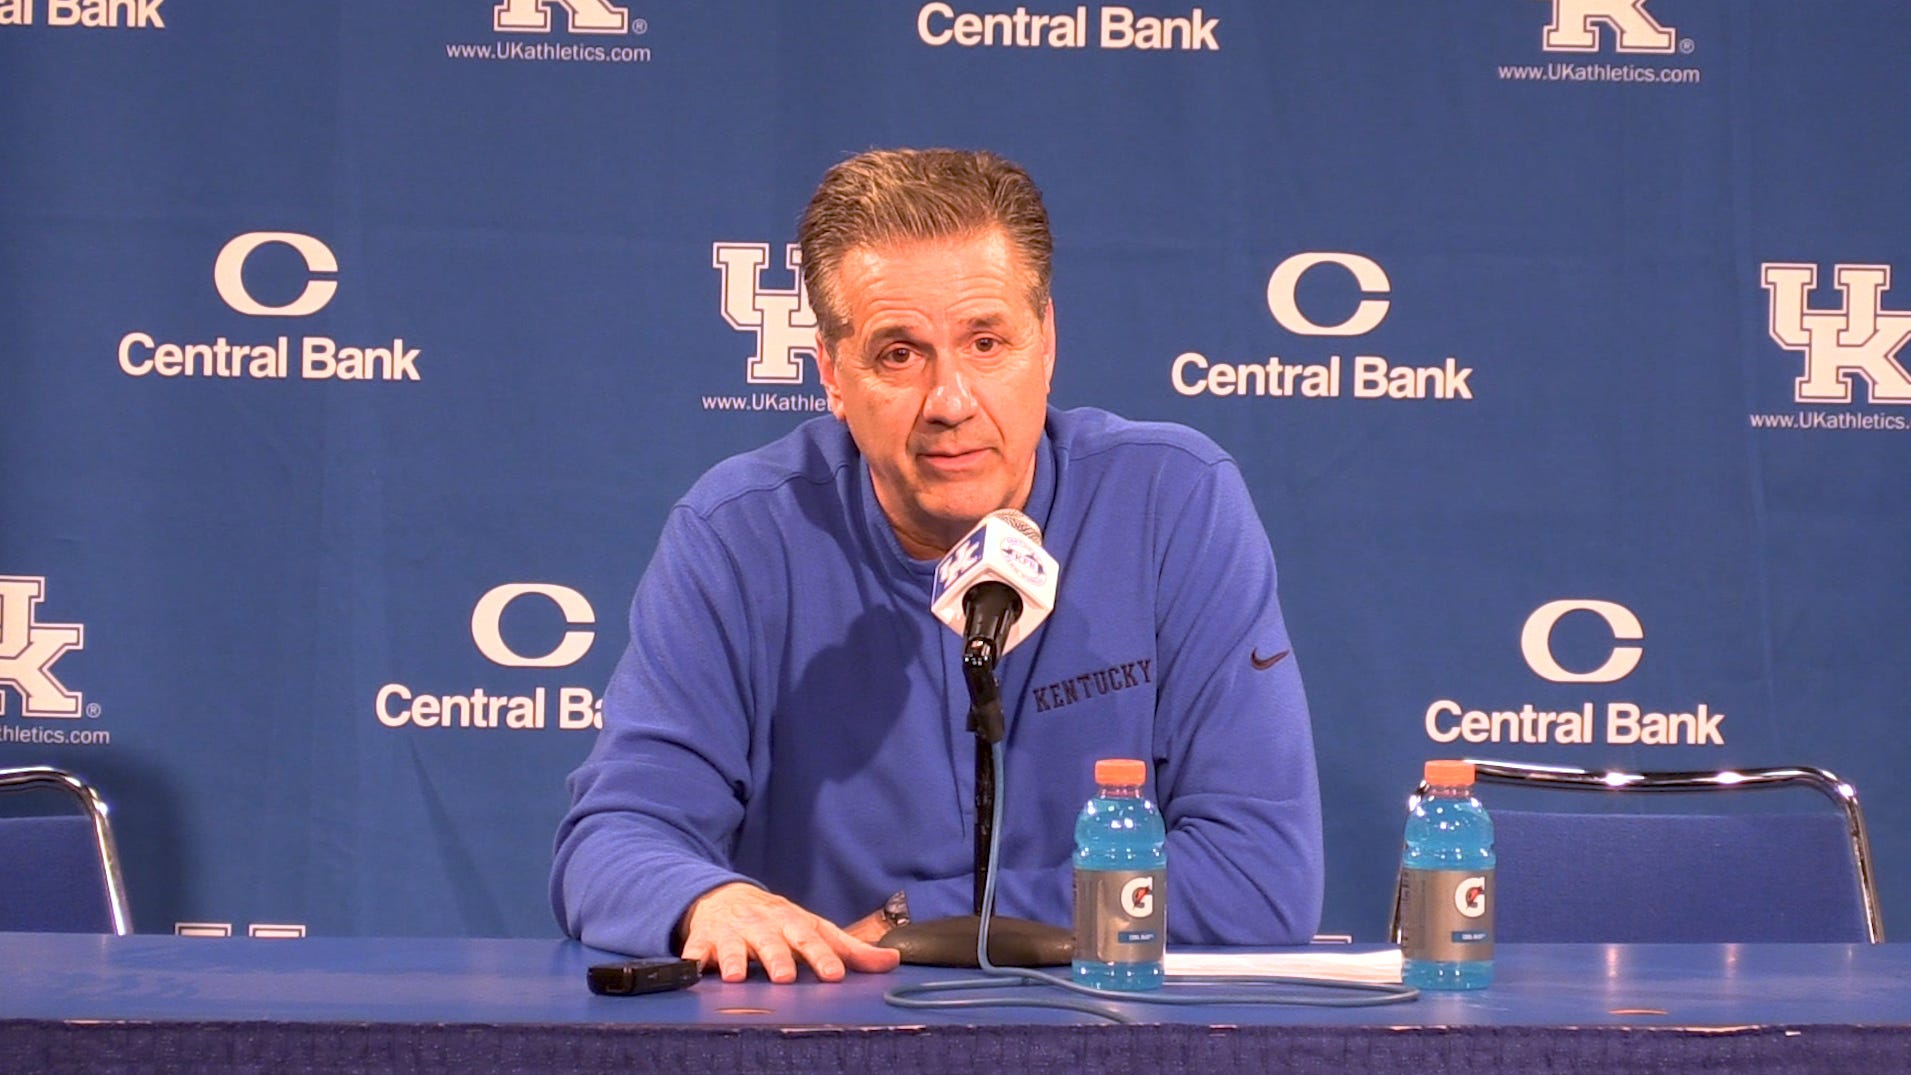 A heckuva win': Coach Calipari talks about his team after win over Florida